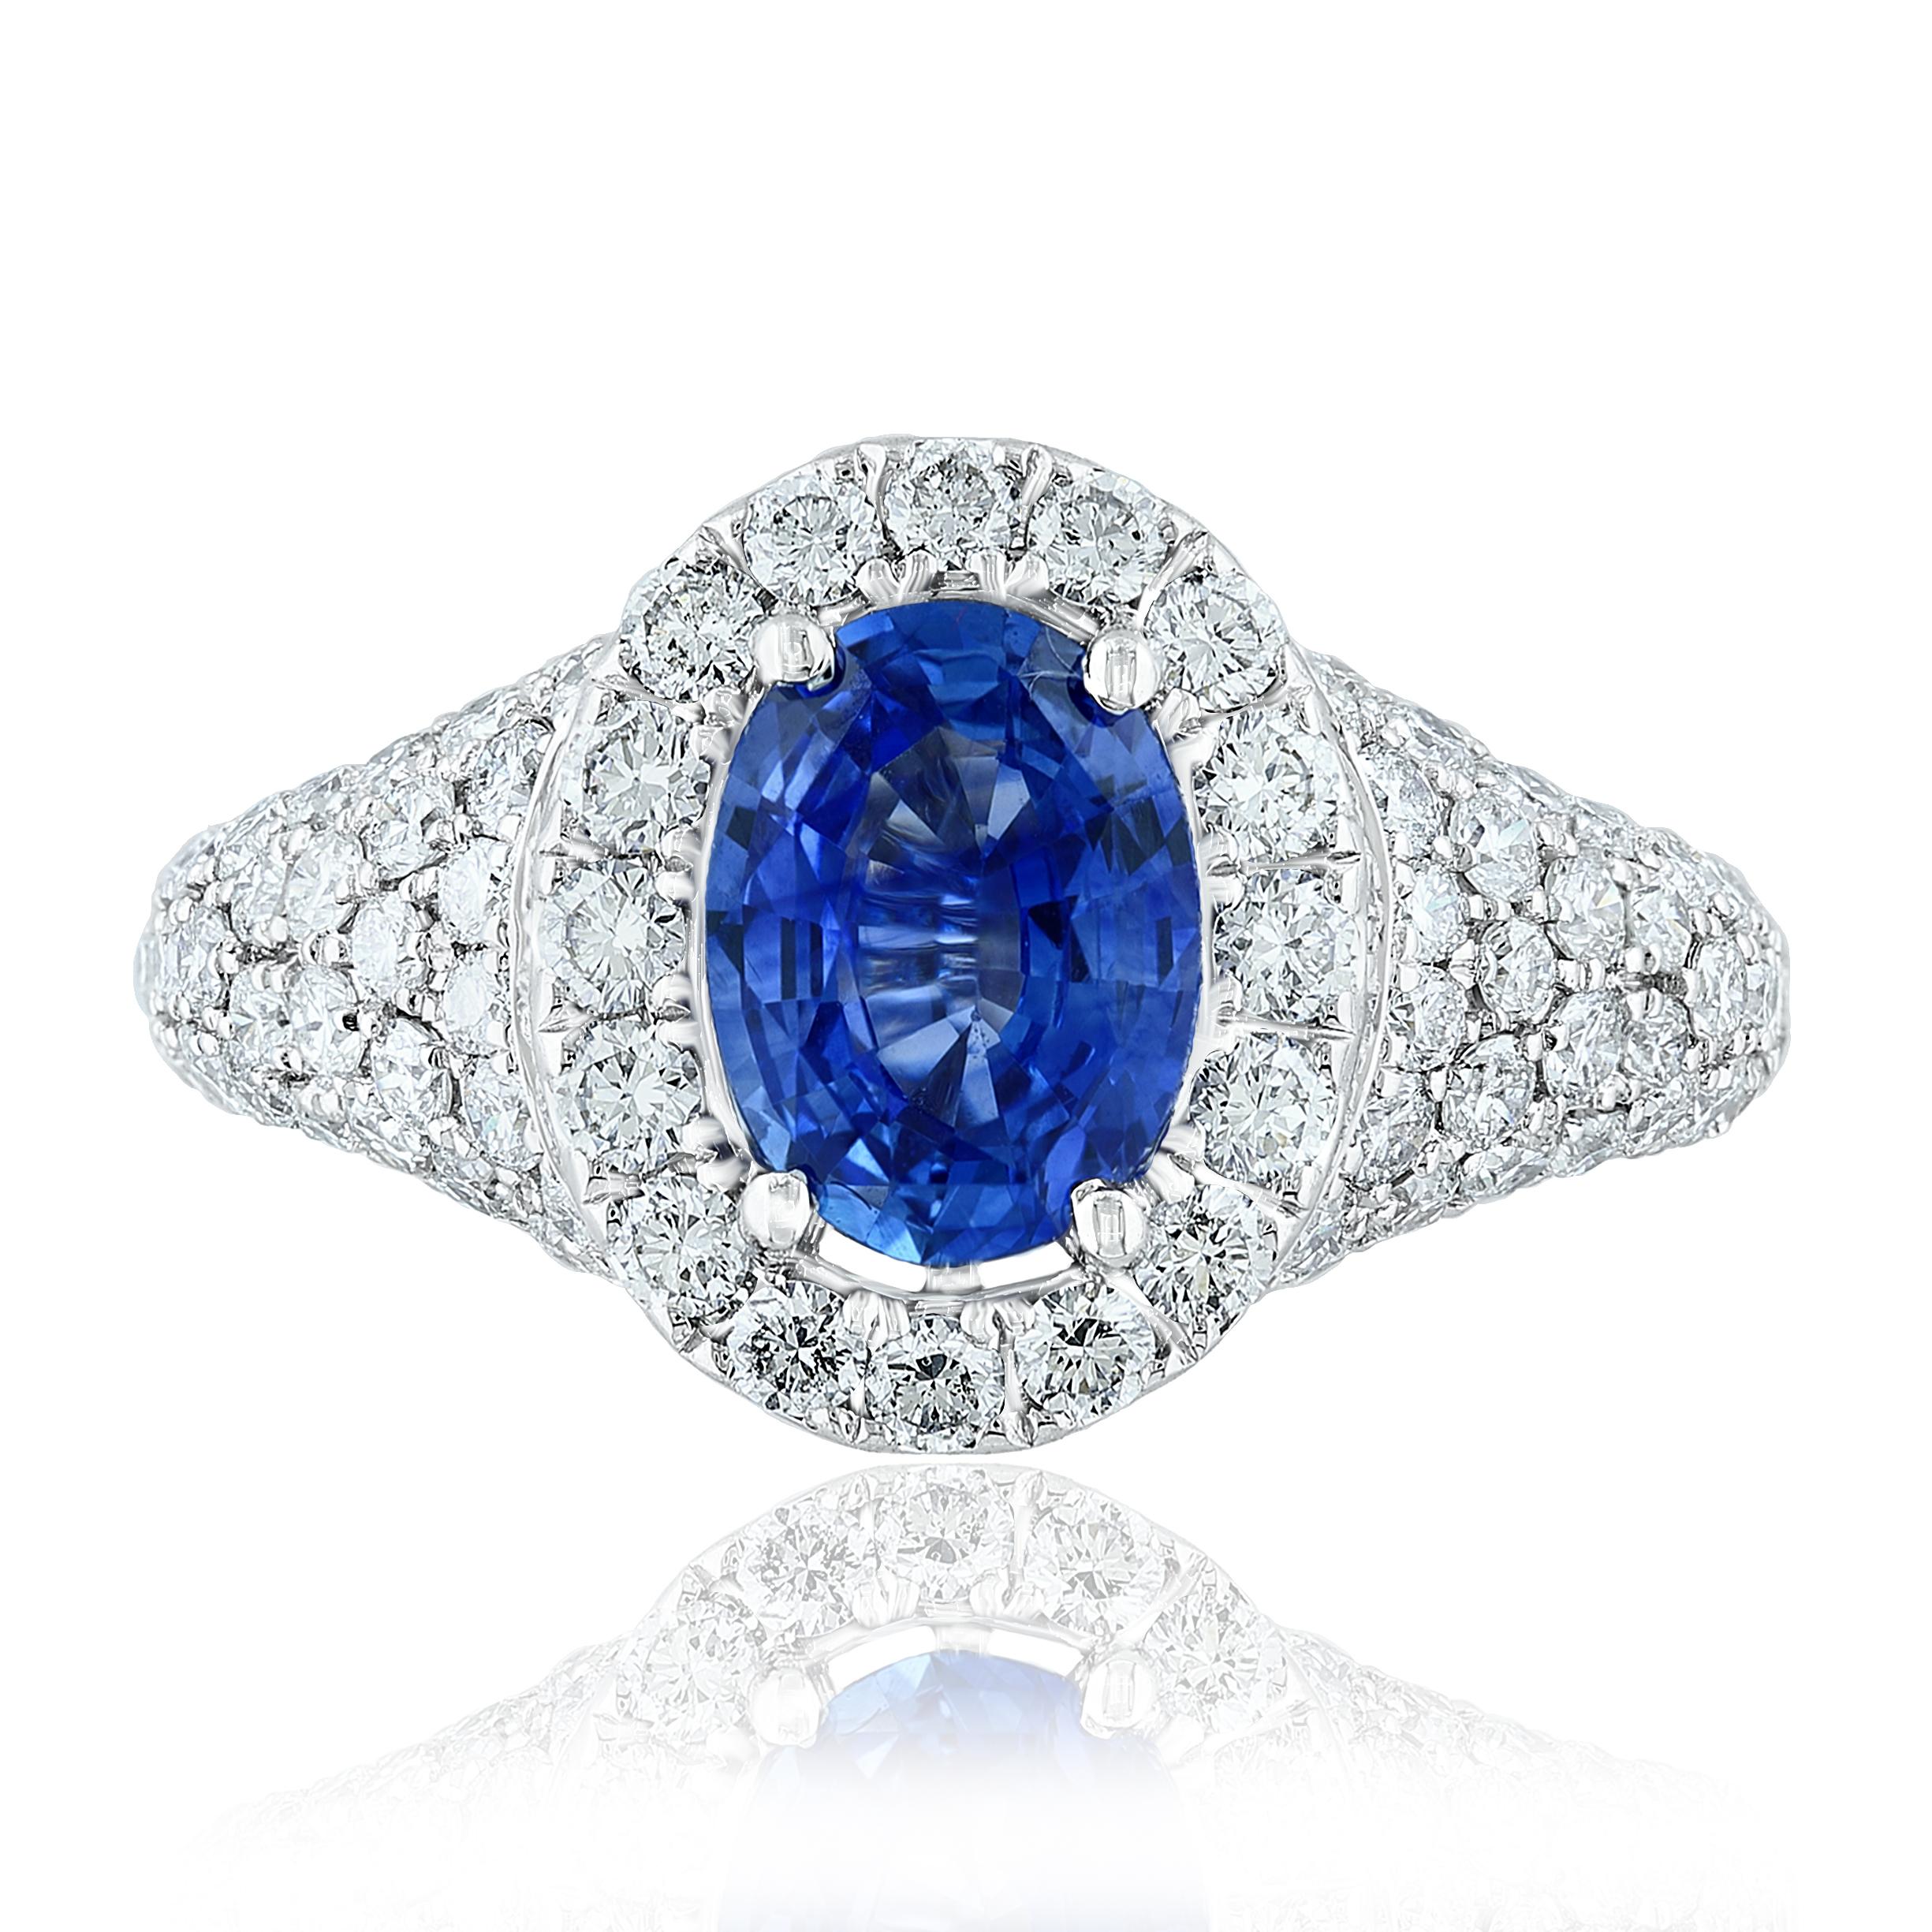 A uniquely-designed ring showcasing a 1.27 Carat Oval Cut Blue Sapphire. Surrounding the center stone are brilliant-cut round diamonds in an 18-karat white gold mounting. 112 diamonds weigh 1.63 carats in total.